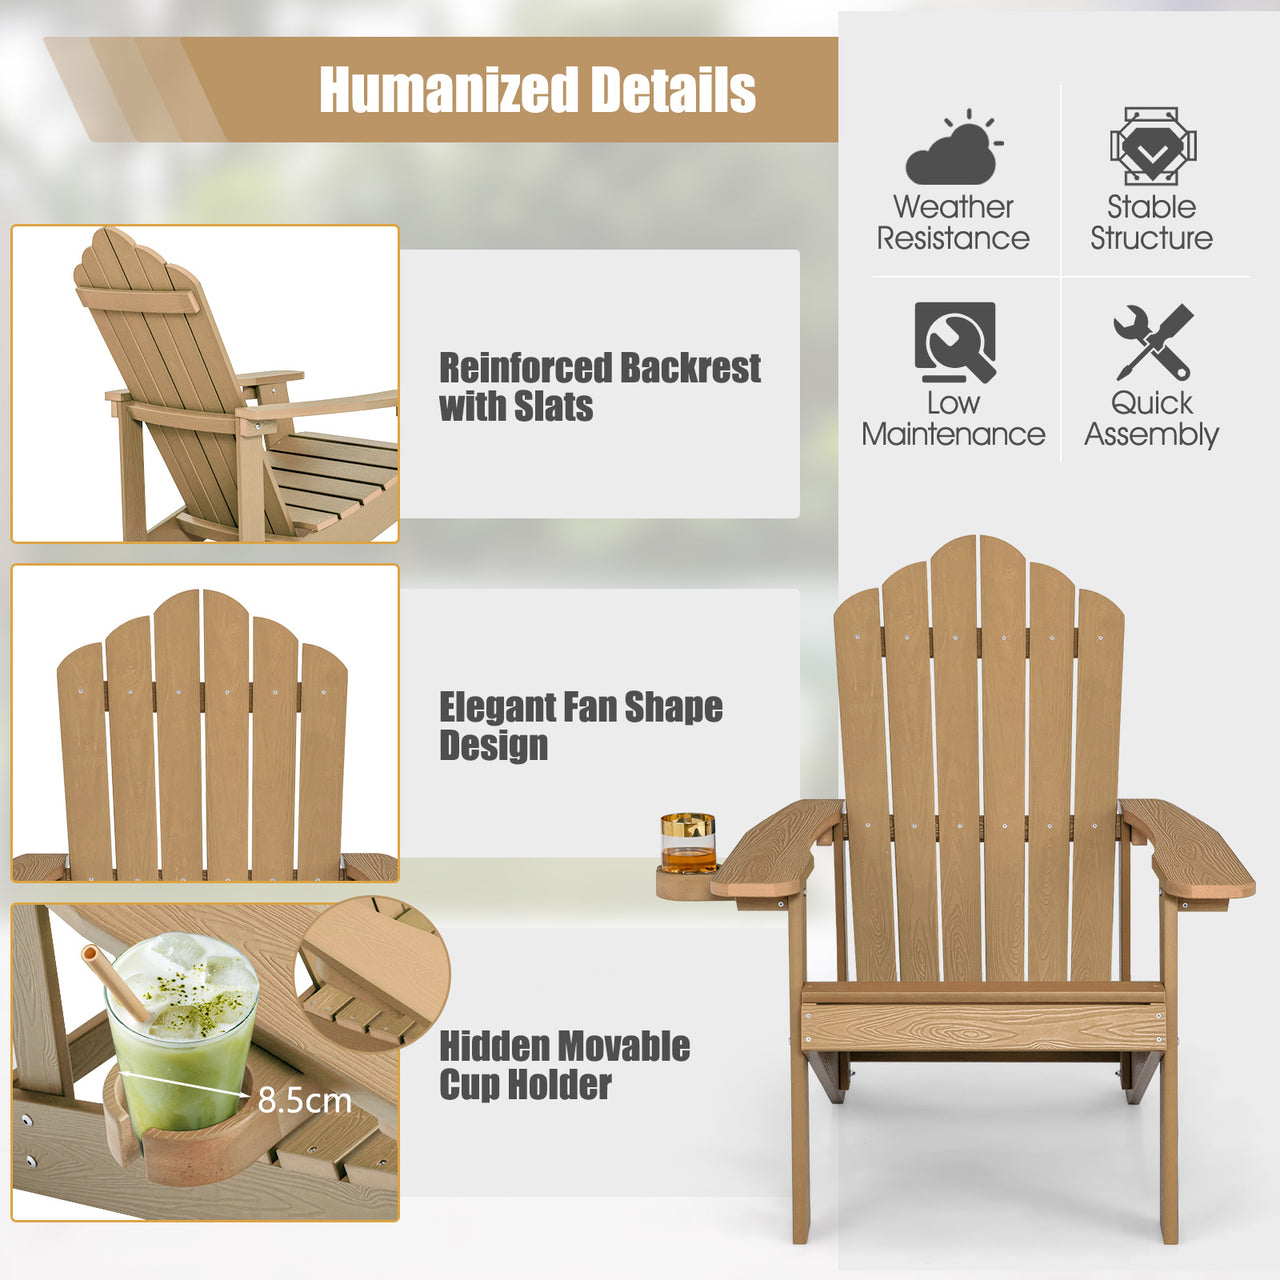 Weather Resistant HIPS Outdoor Adirondack Chair with Cup Holder - Gallery View 5 of 11